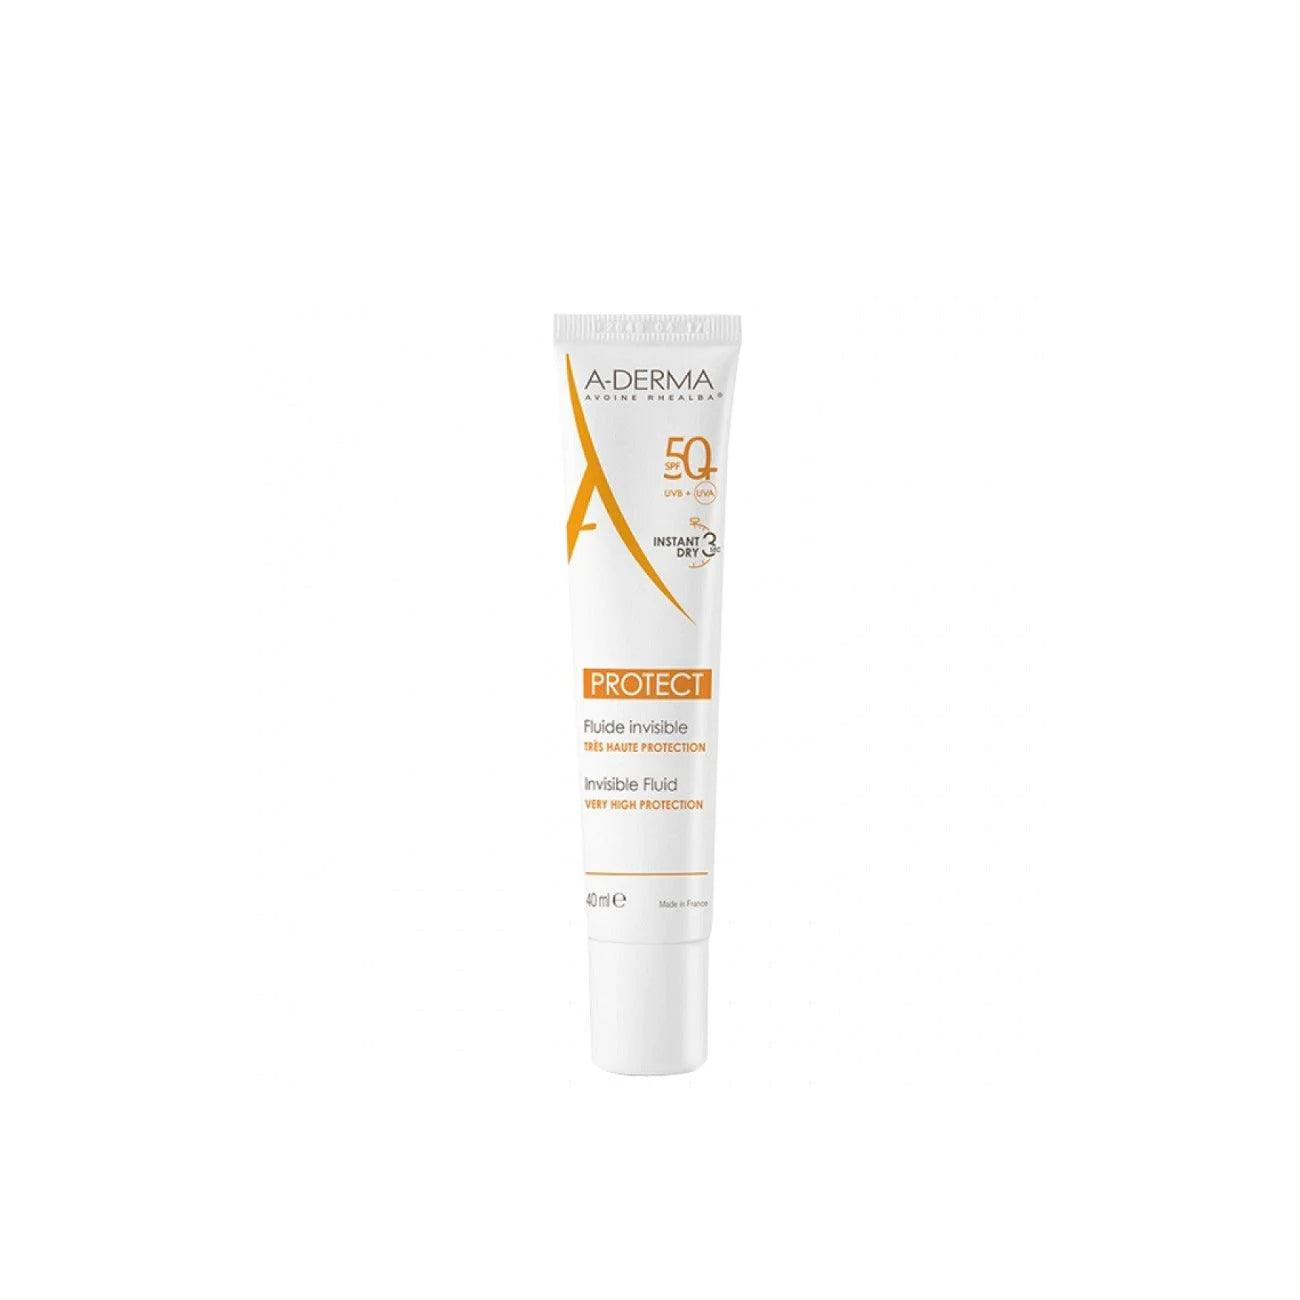 ADERMA Protect Invisible Face Sunscreen Fluid SPF50+